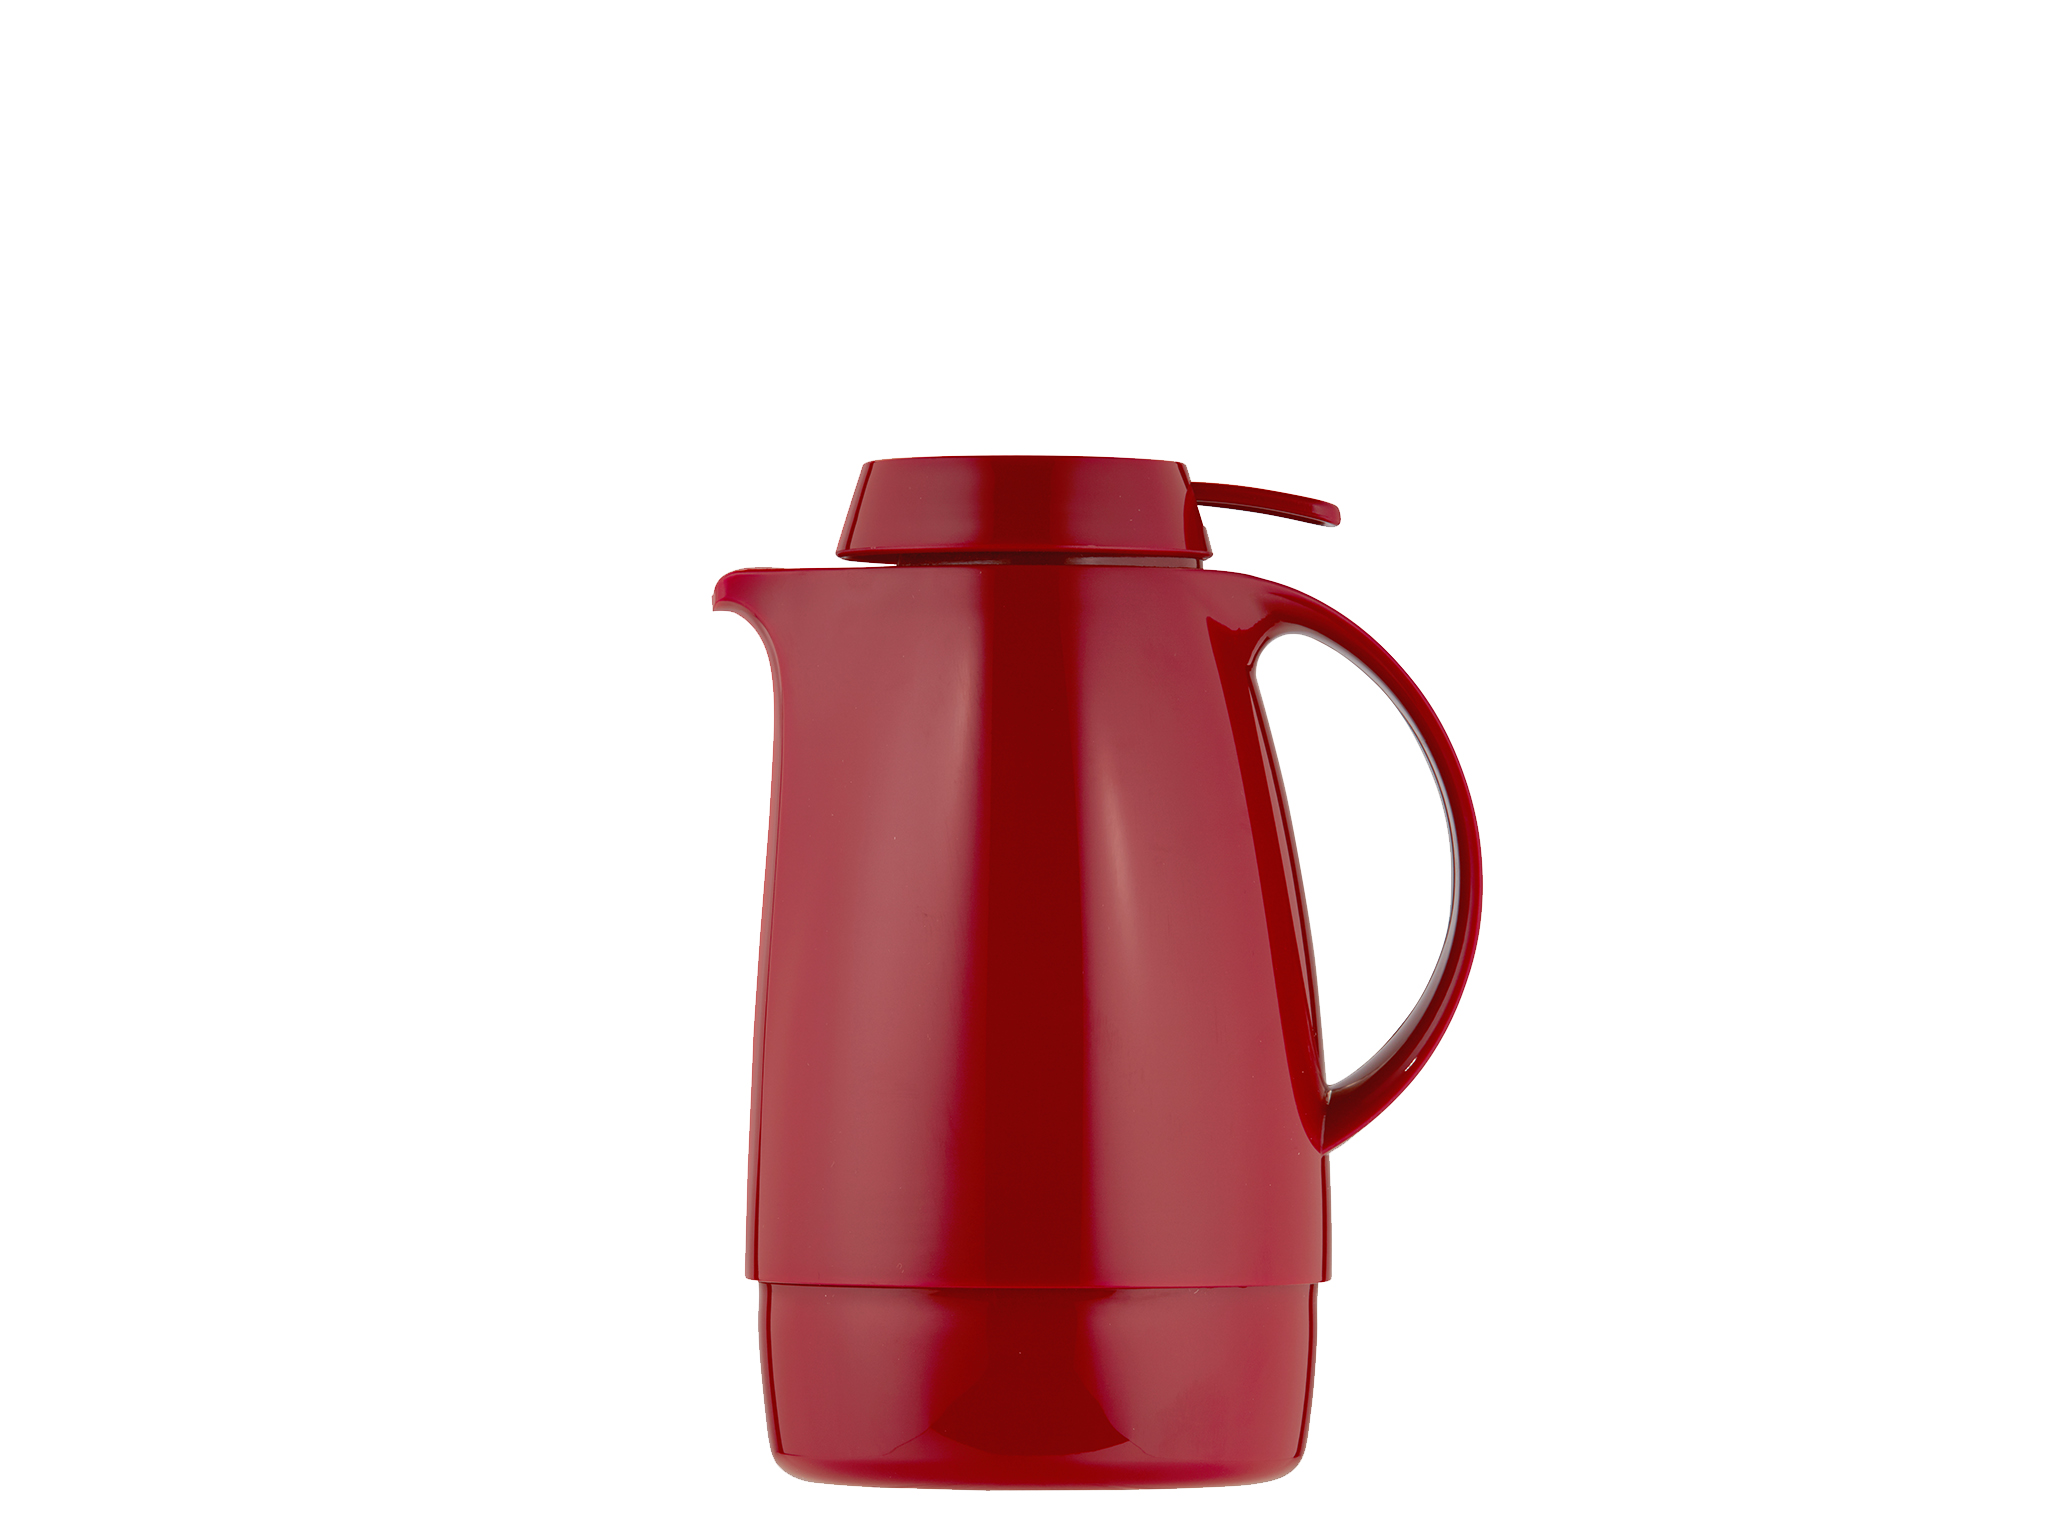 7202-046 - Vacuum carafe red 0.6 L SERVITHERM - Helios